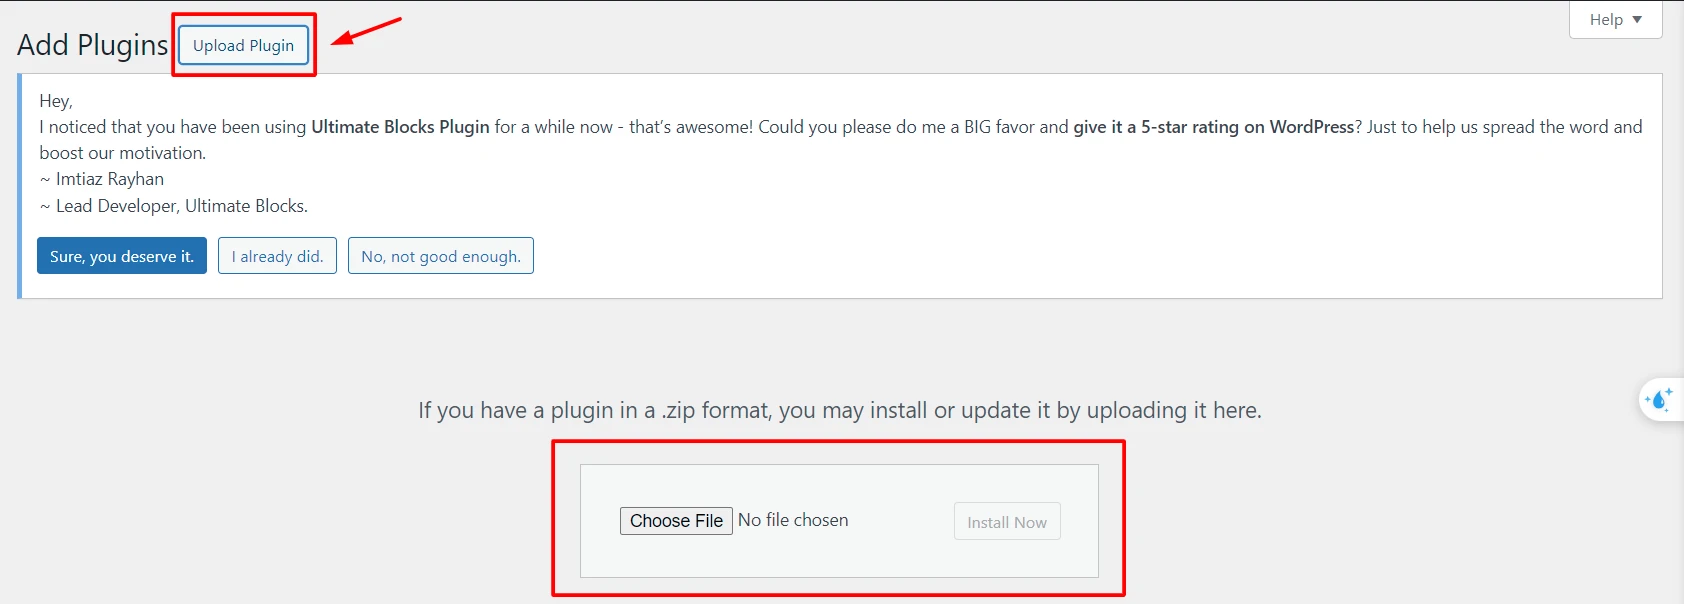 Select Upload Plugin and get a target file 